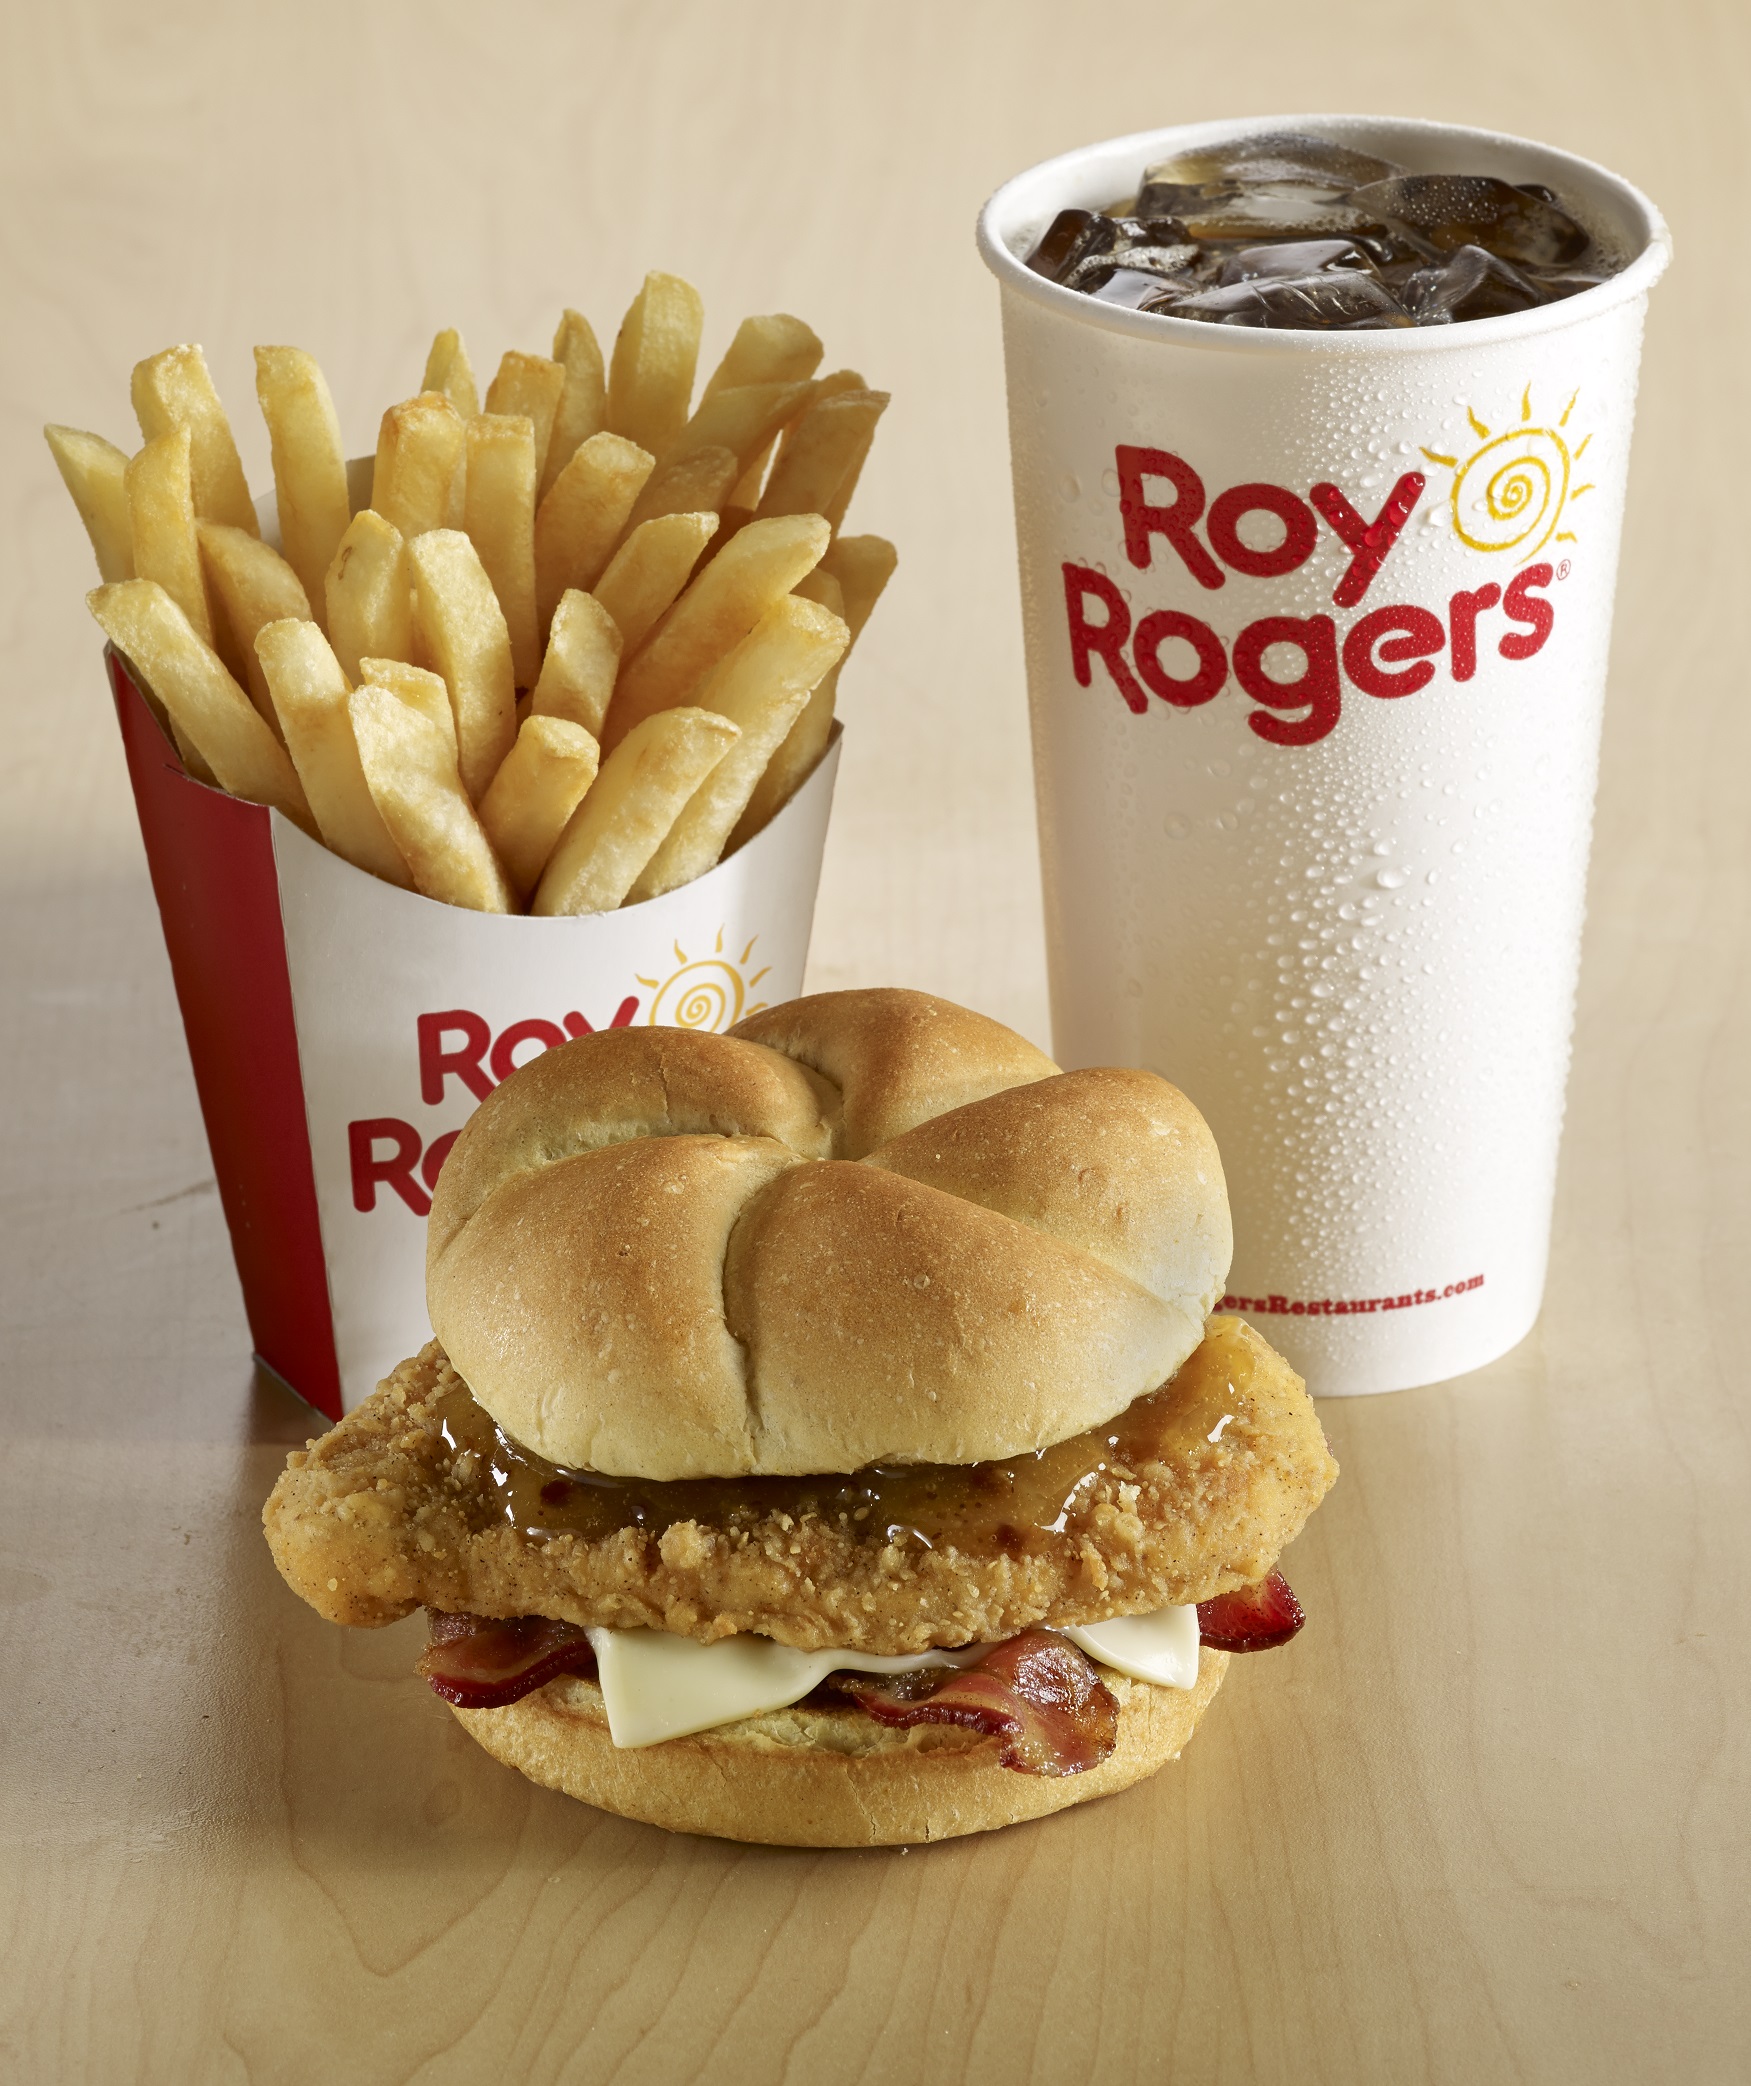 Roy Rogers to open another restaurant in Montgomery Co.